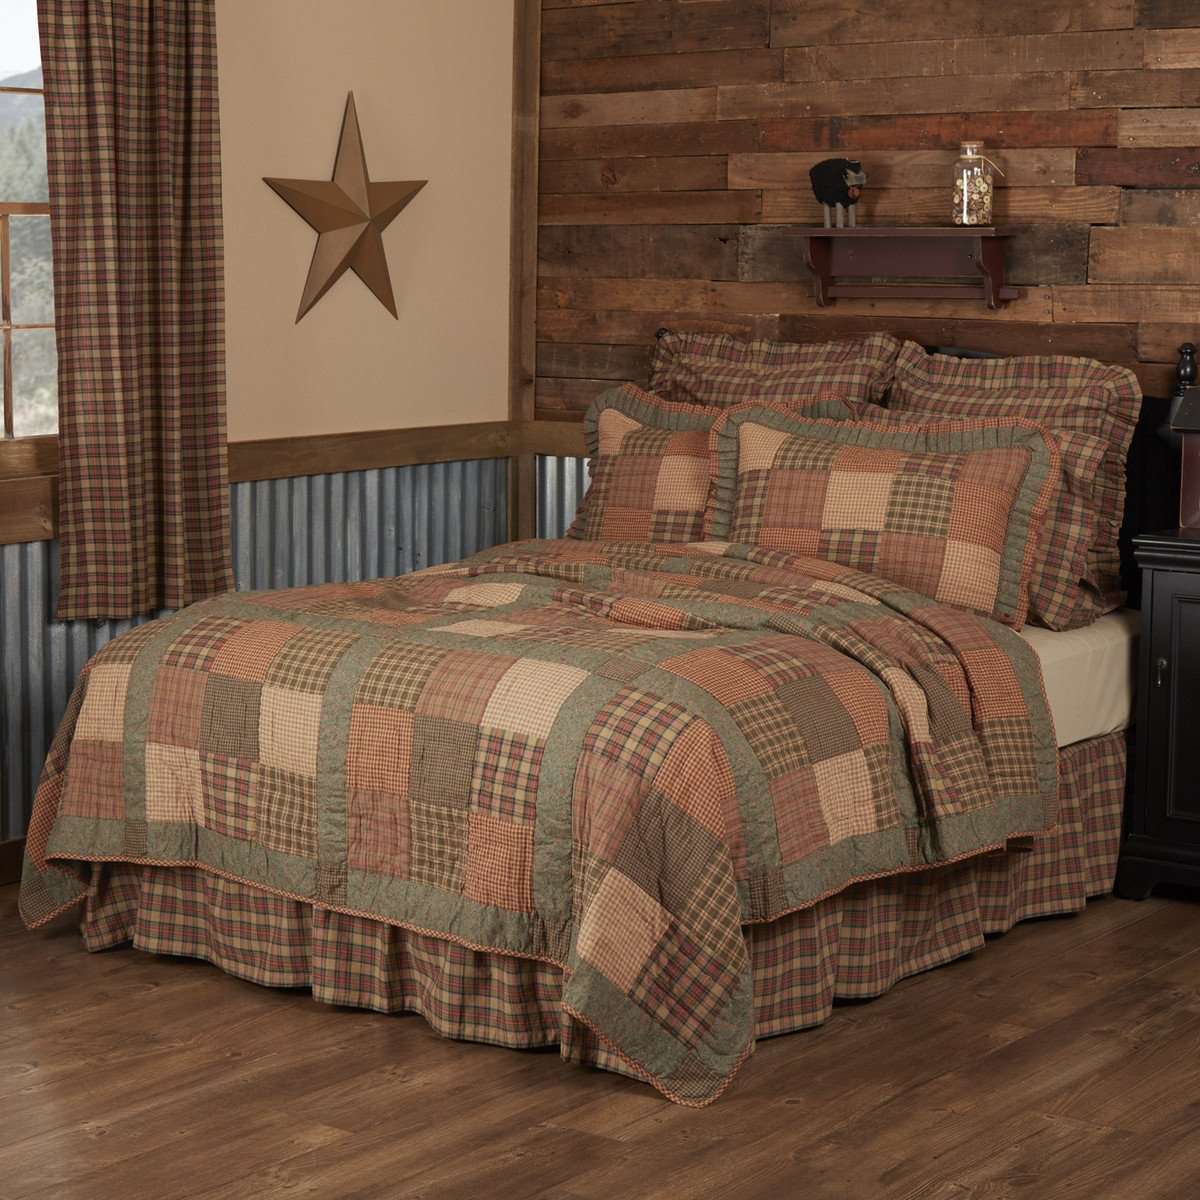 Crosswoods California King Quilt 130Wx115L VHC Brands